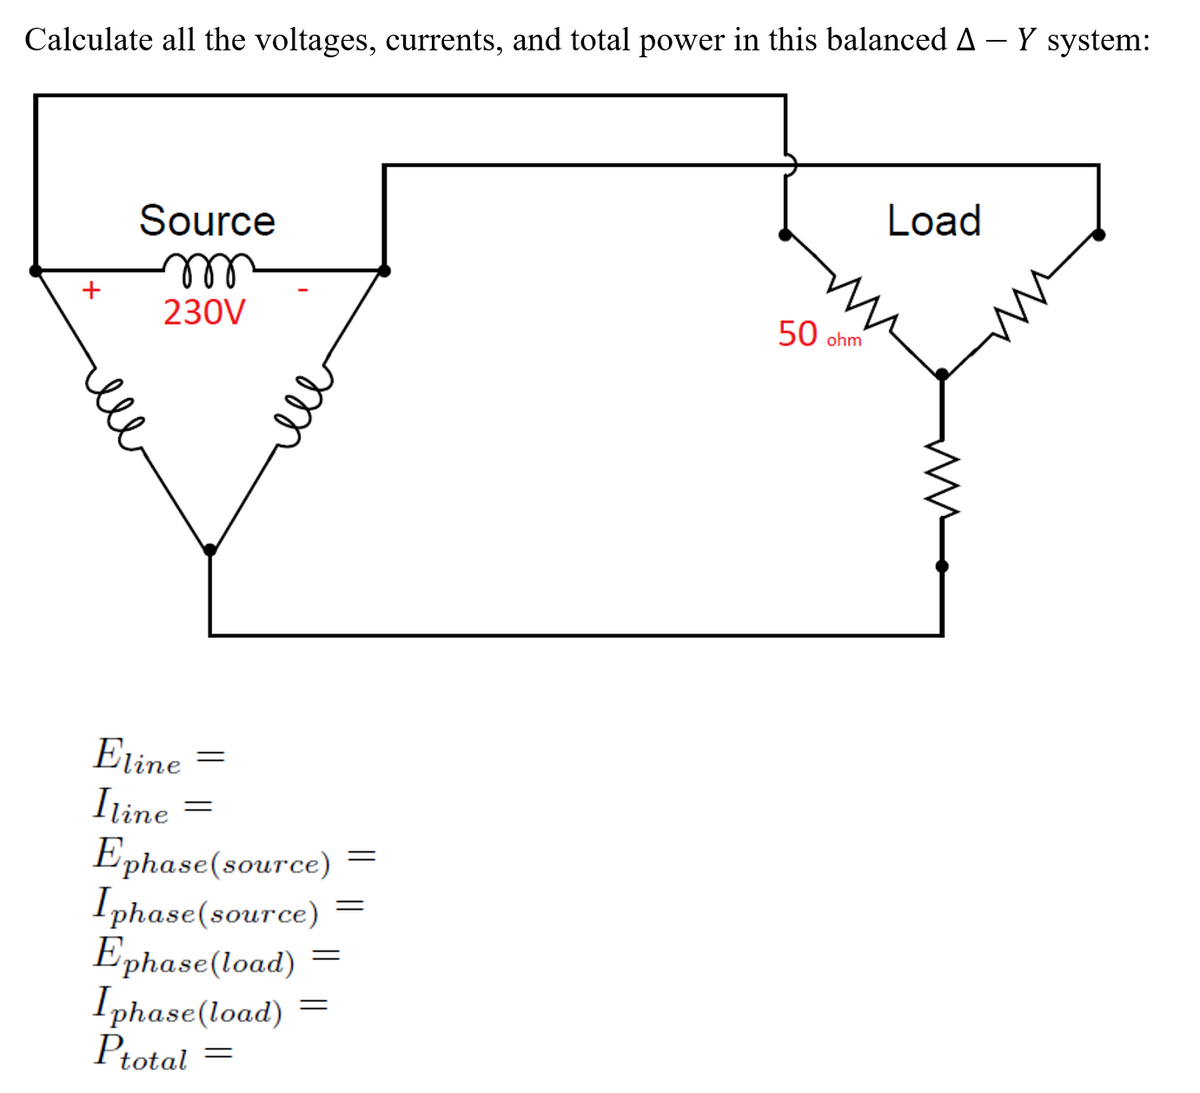 Calculate all the voltages, currents, and total power in this balanced A - Y system:
Load
Source
ll
+
230V
50 ohm
Eline
Iline
Ephase(source)
Iphase(source)
Ephase(load)
Iphase(load) =
Ptotal =
ll
ll
